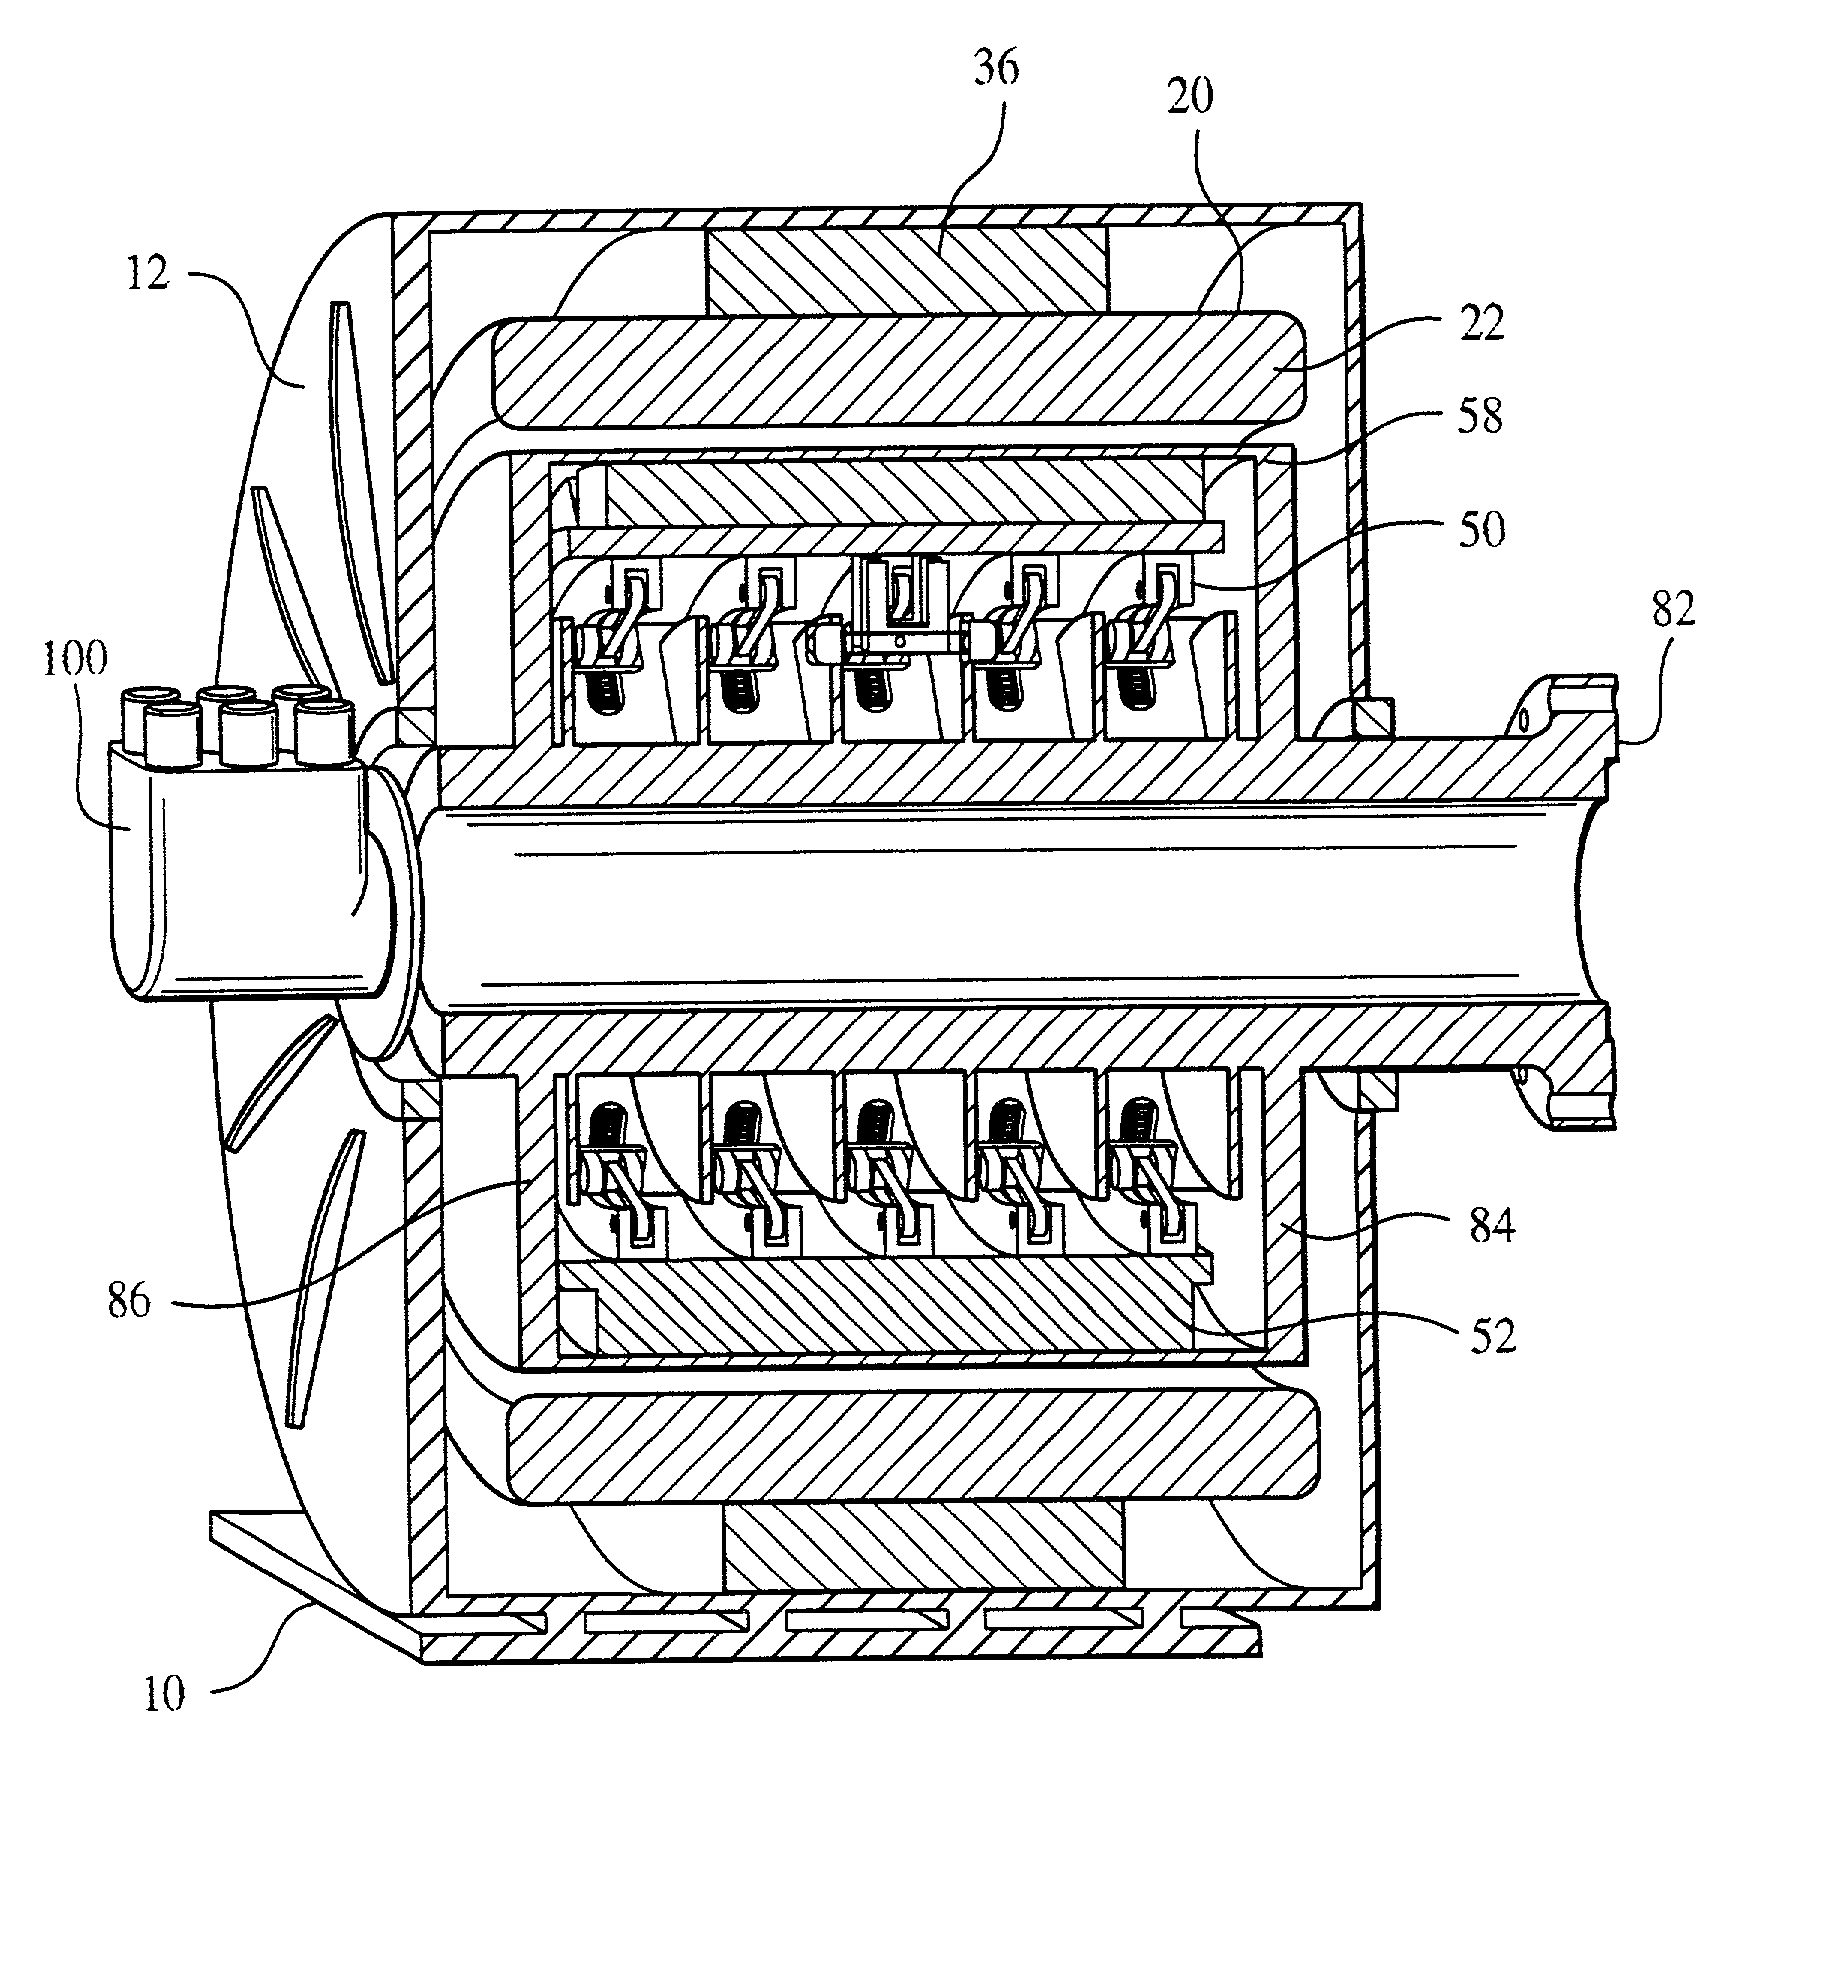 Stator coil assembly for superconducting rotating machines